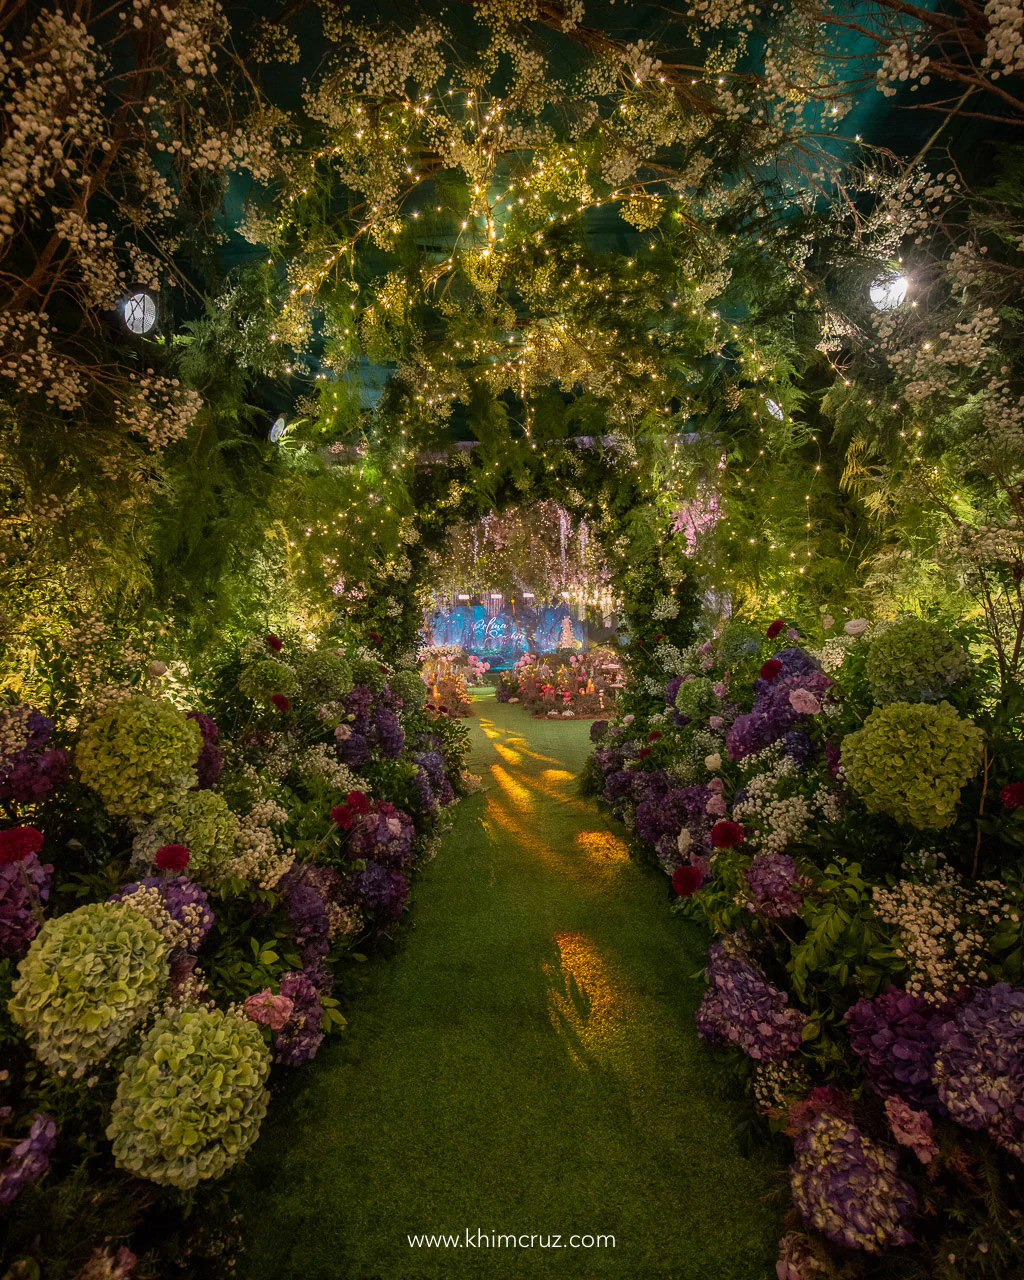 tunnel of floral magic passage to the secret enchanted forest ballroom for Sophie's debut designed by Khim Cruz